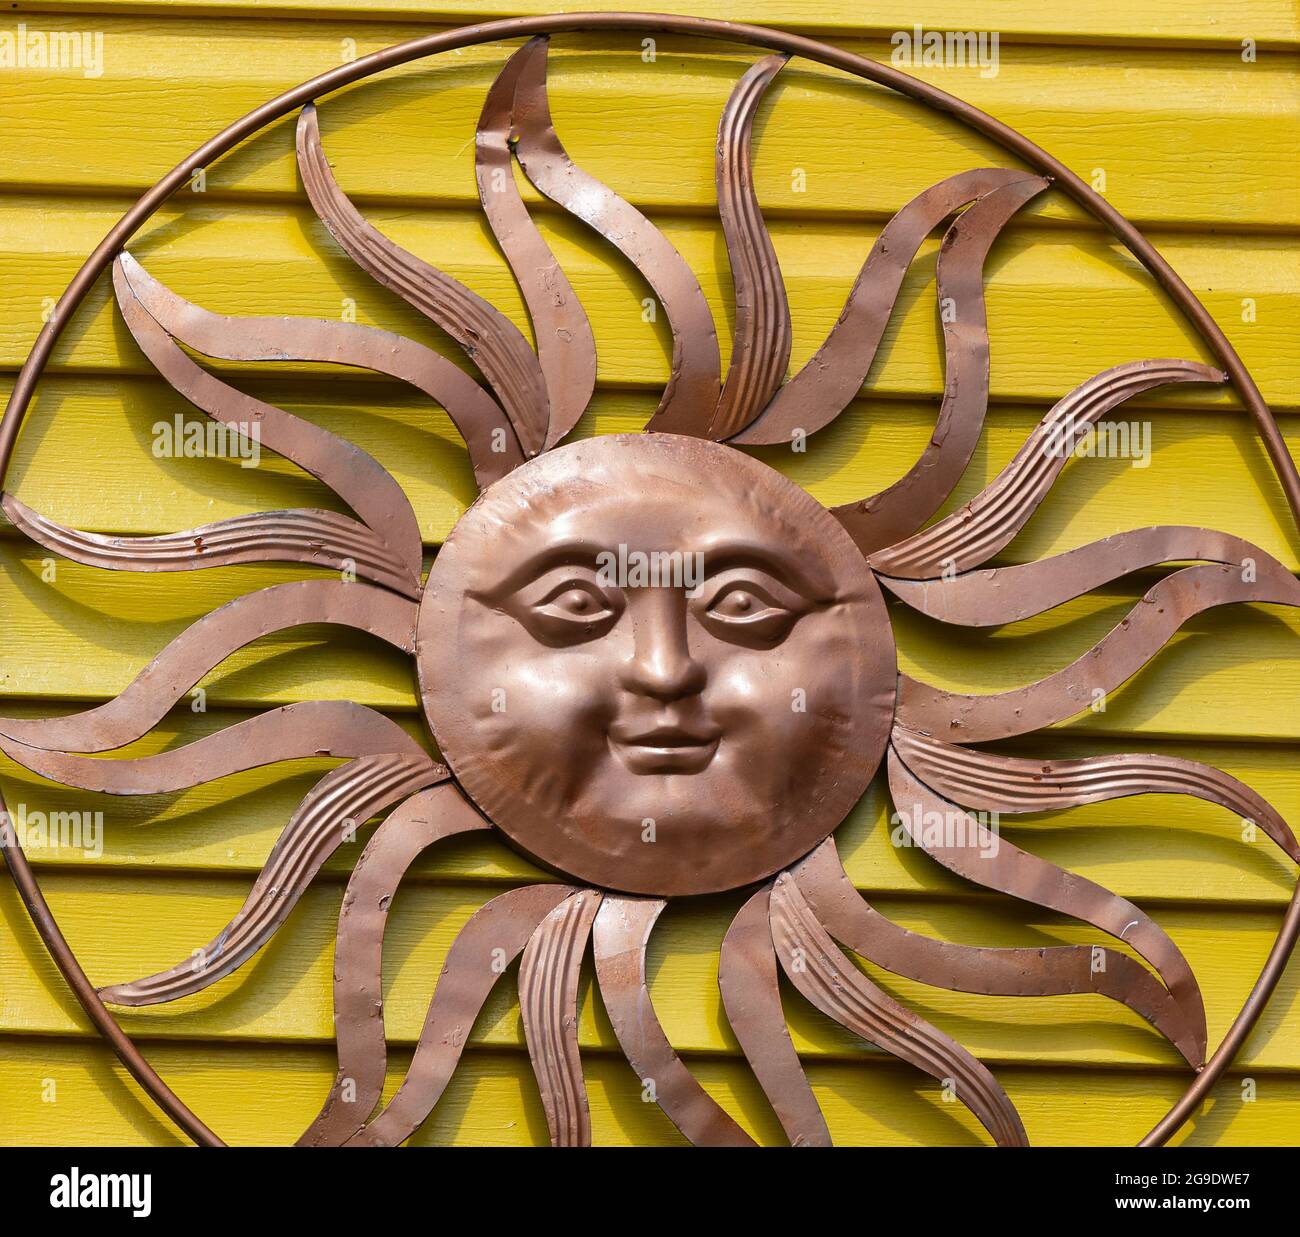 Bronze metal sun decoration on yellow wall of the house. Street view, travel photo, selective focus. Stock Photo